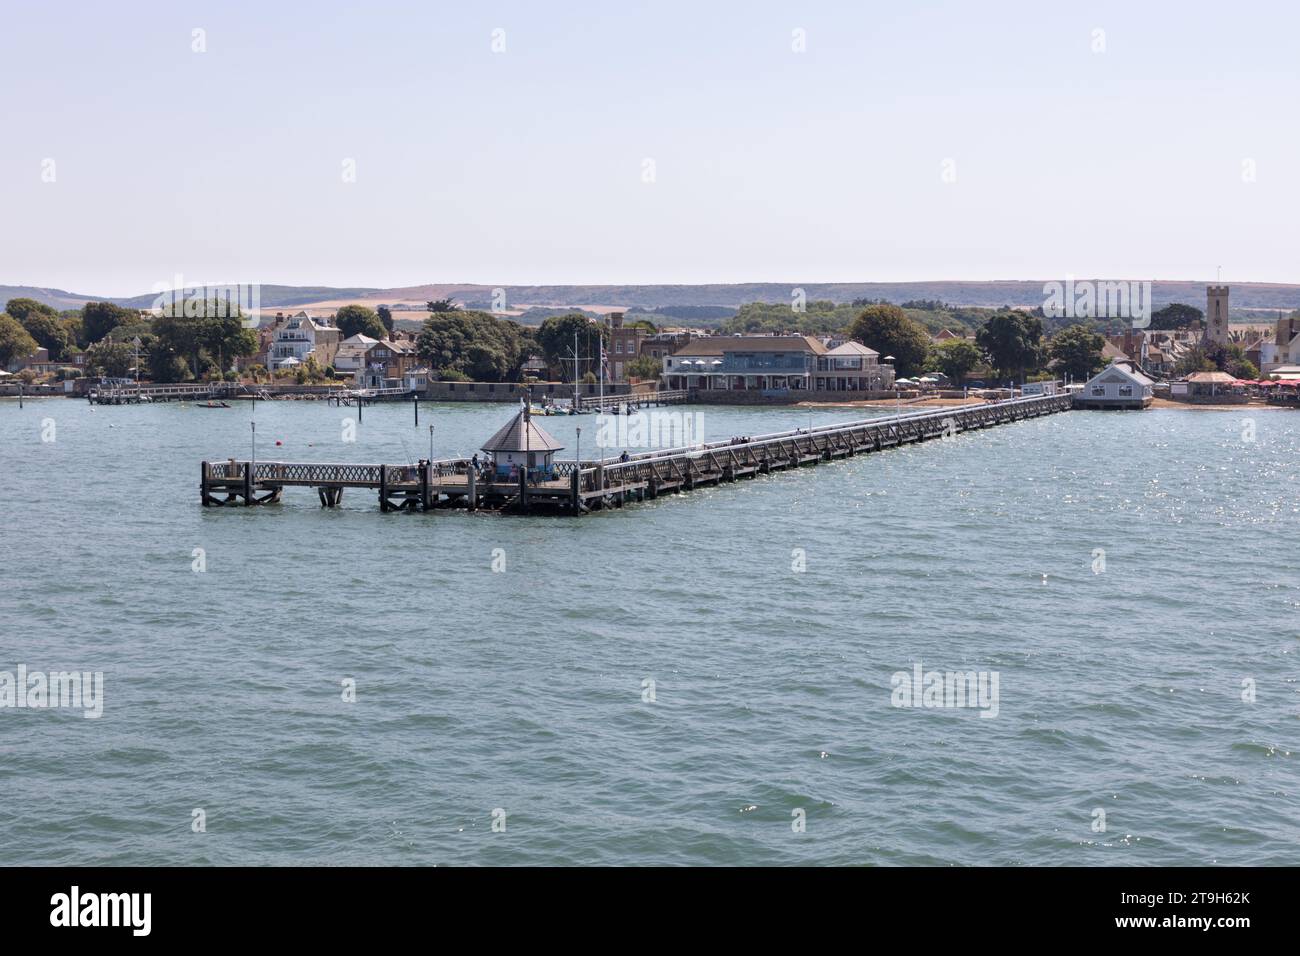 Yarmouth Pier, the longest wooden pier in England, in Yarmouth, Isle of Wight Stock Photo